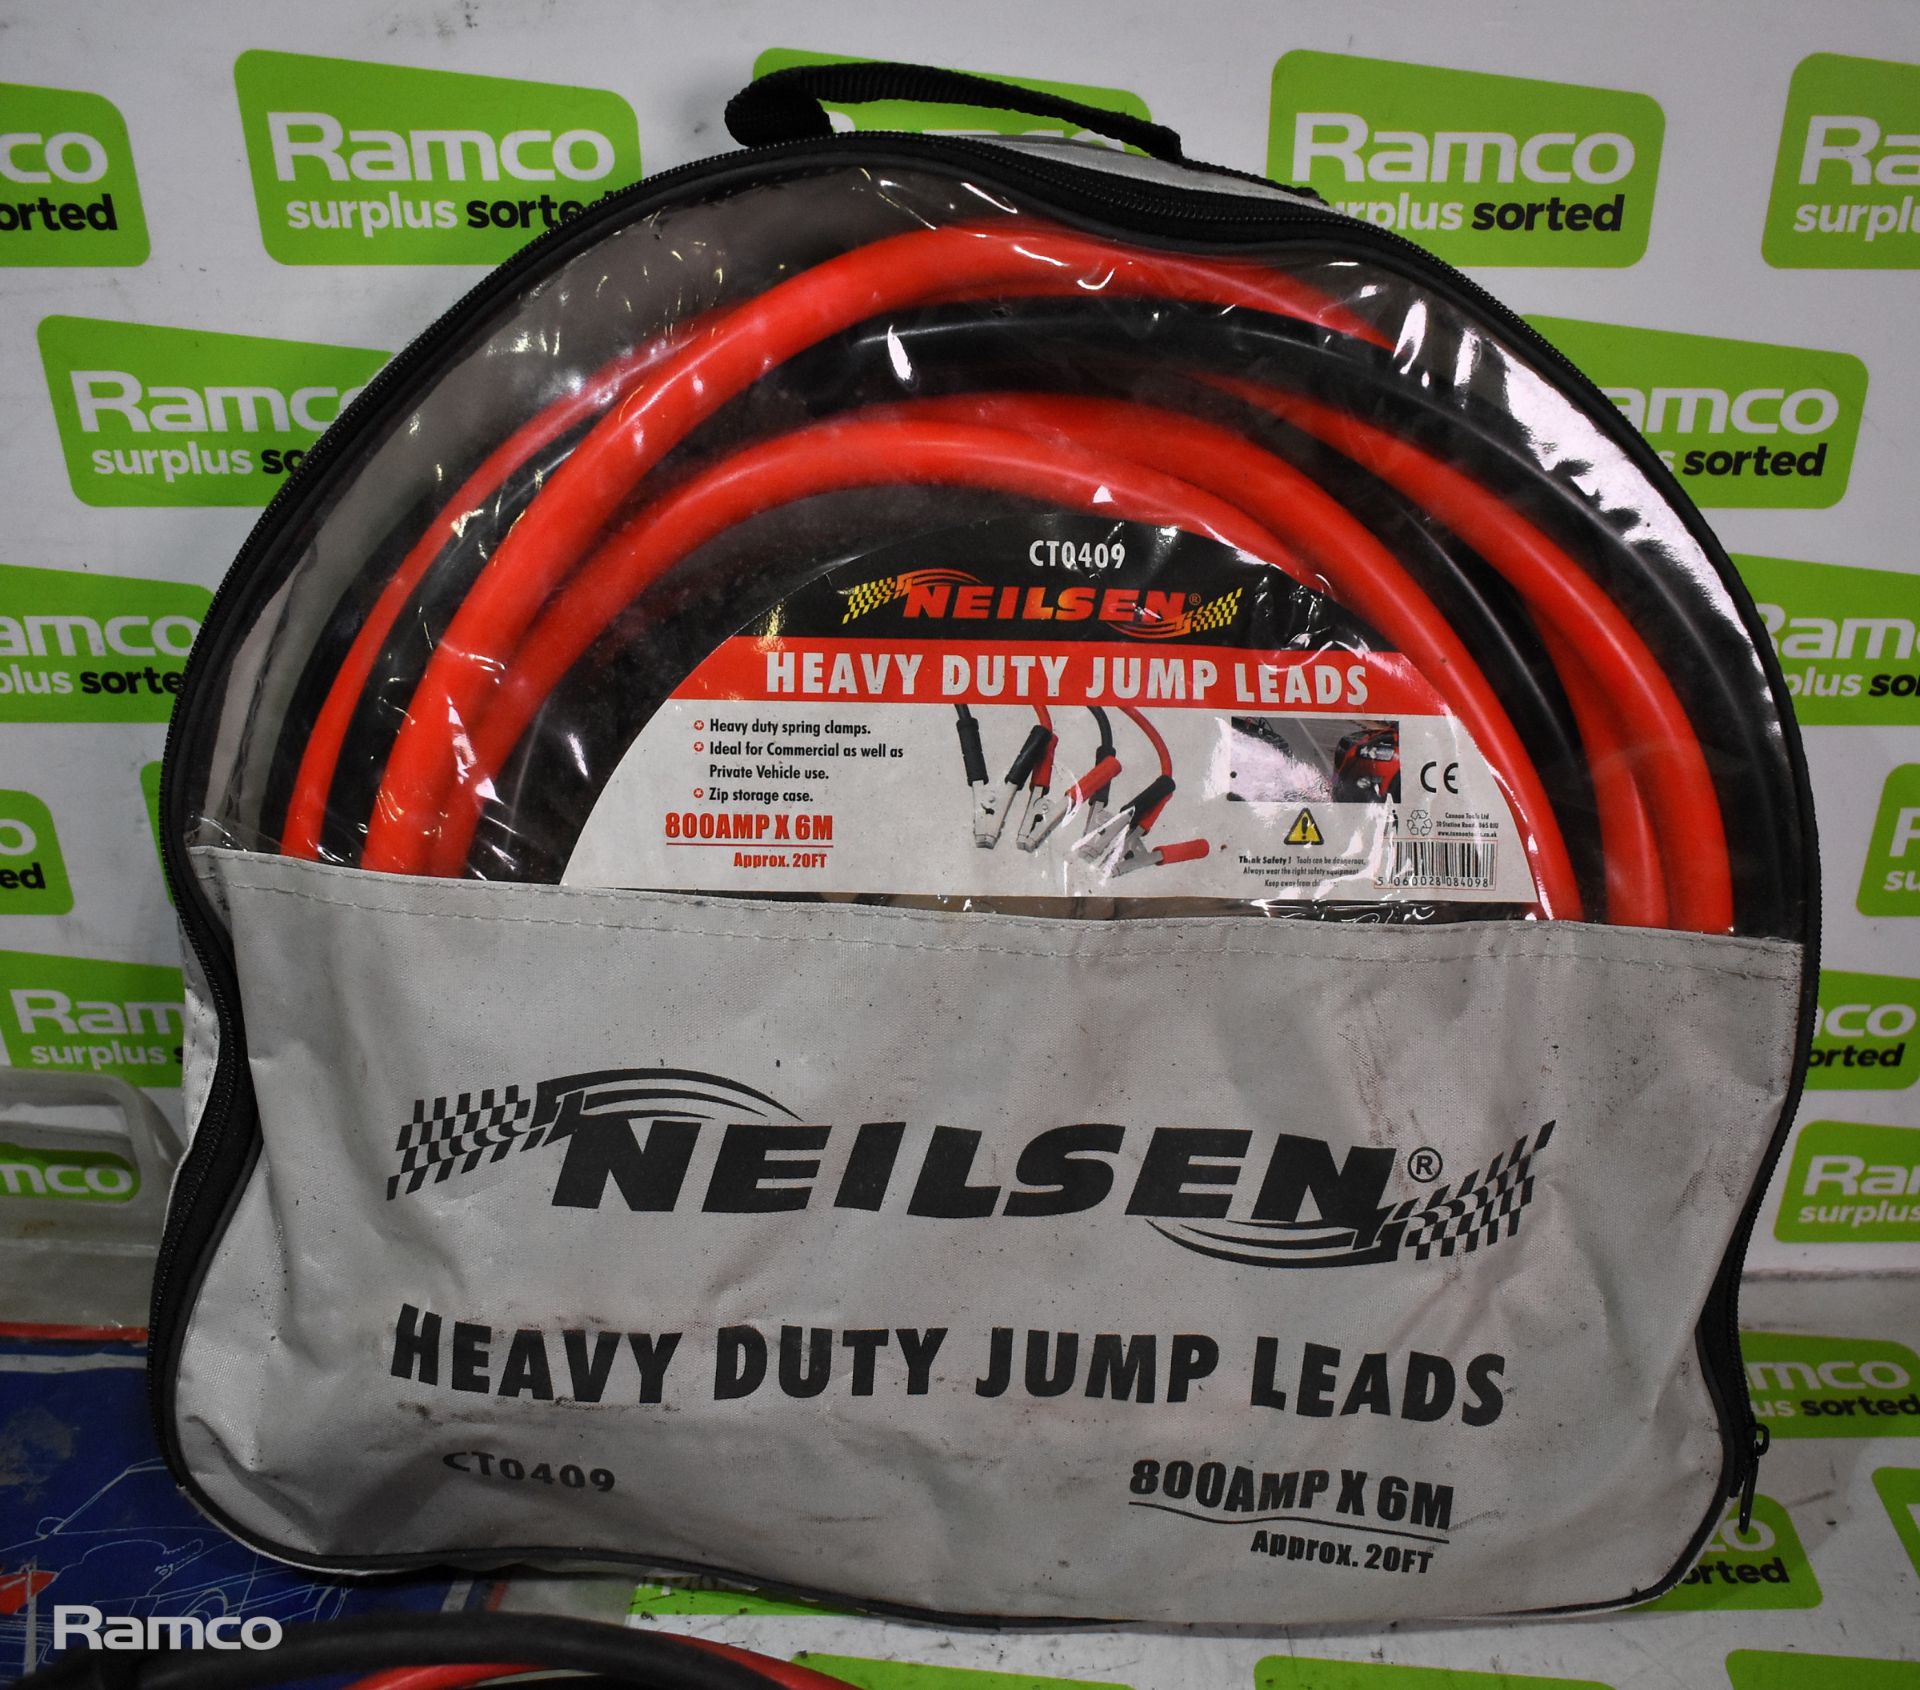 2x Heavy duty jump leads - Image 4 of 4